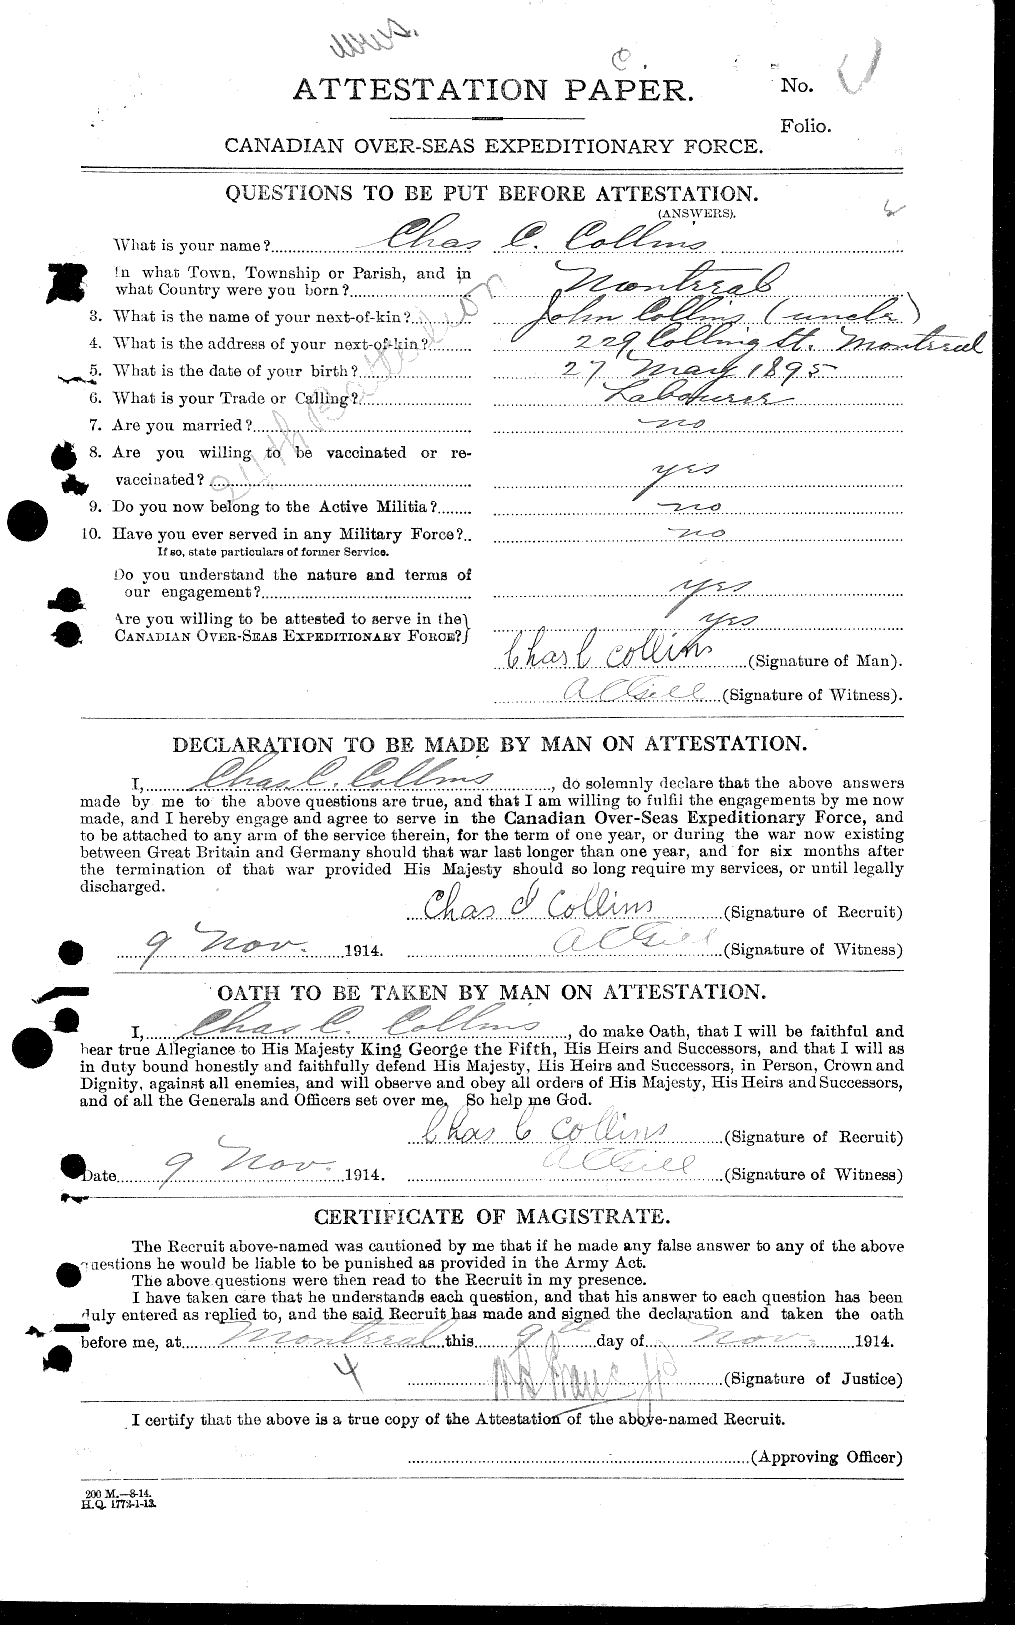 Personnel Records of the First World War - CEF 029026a